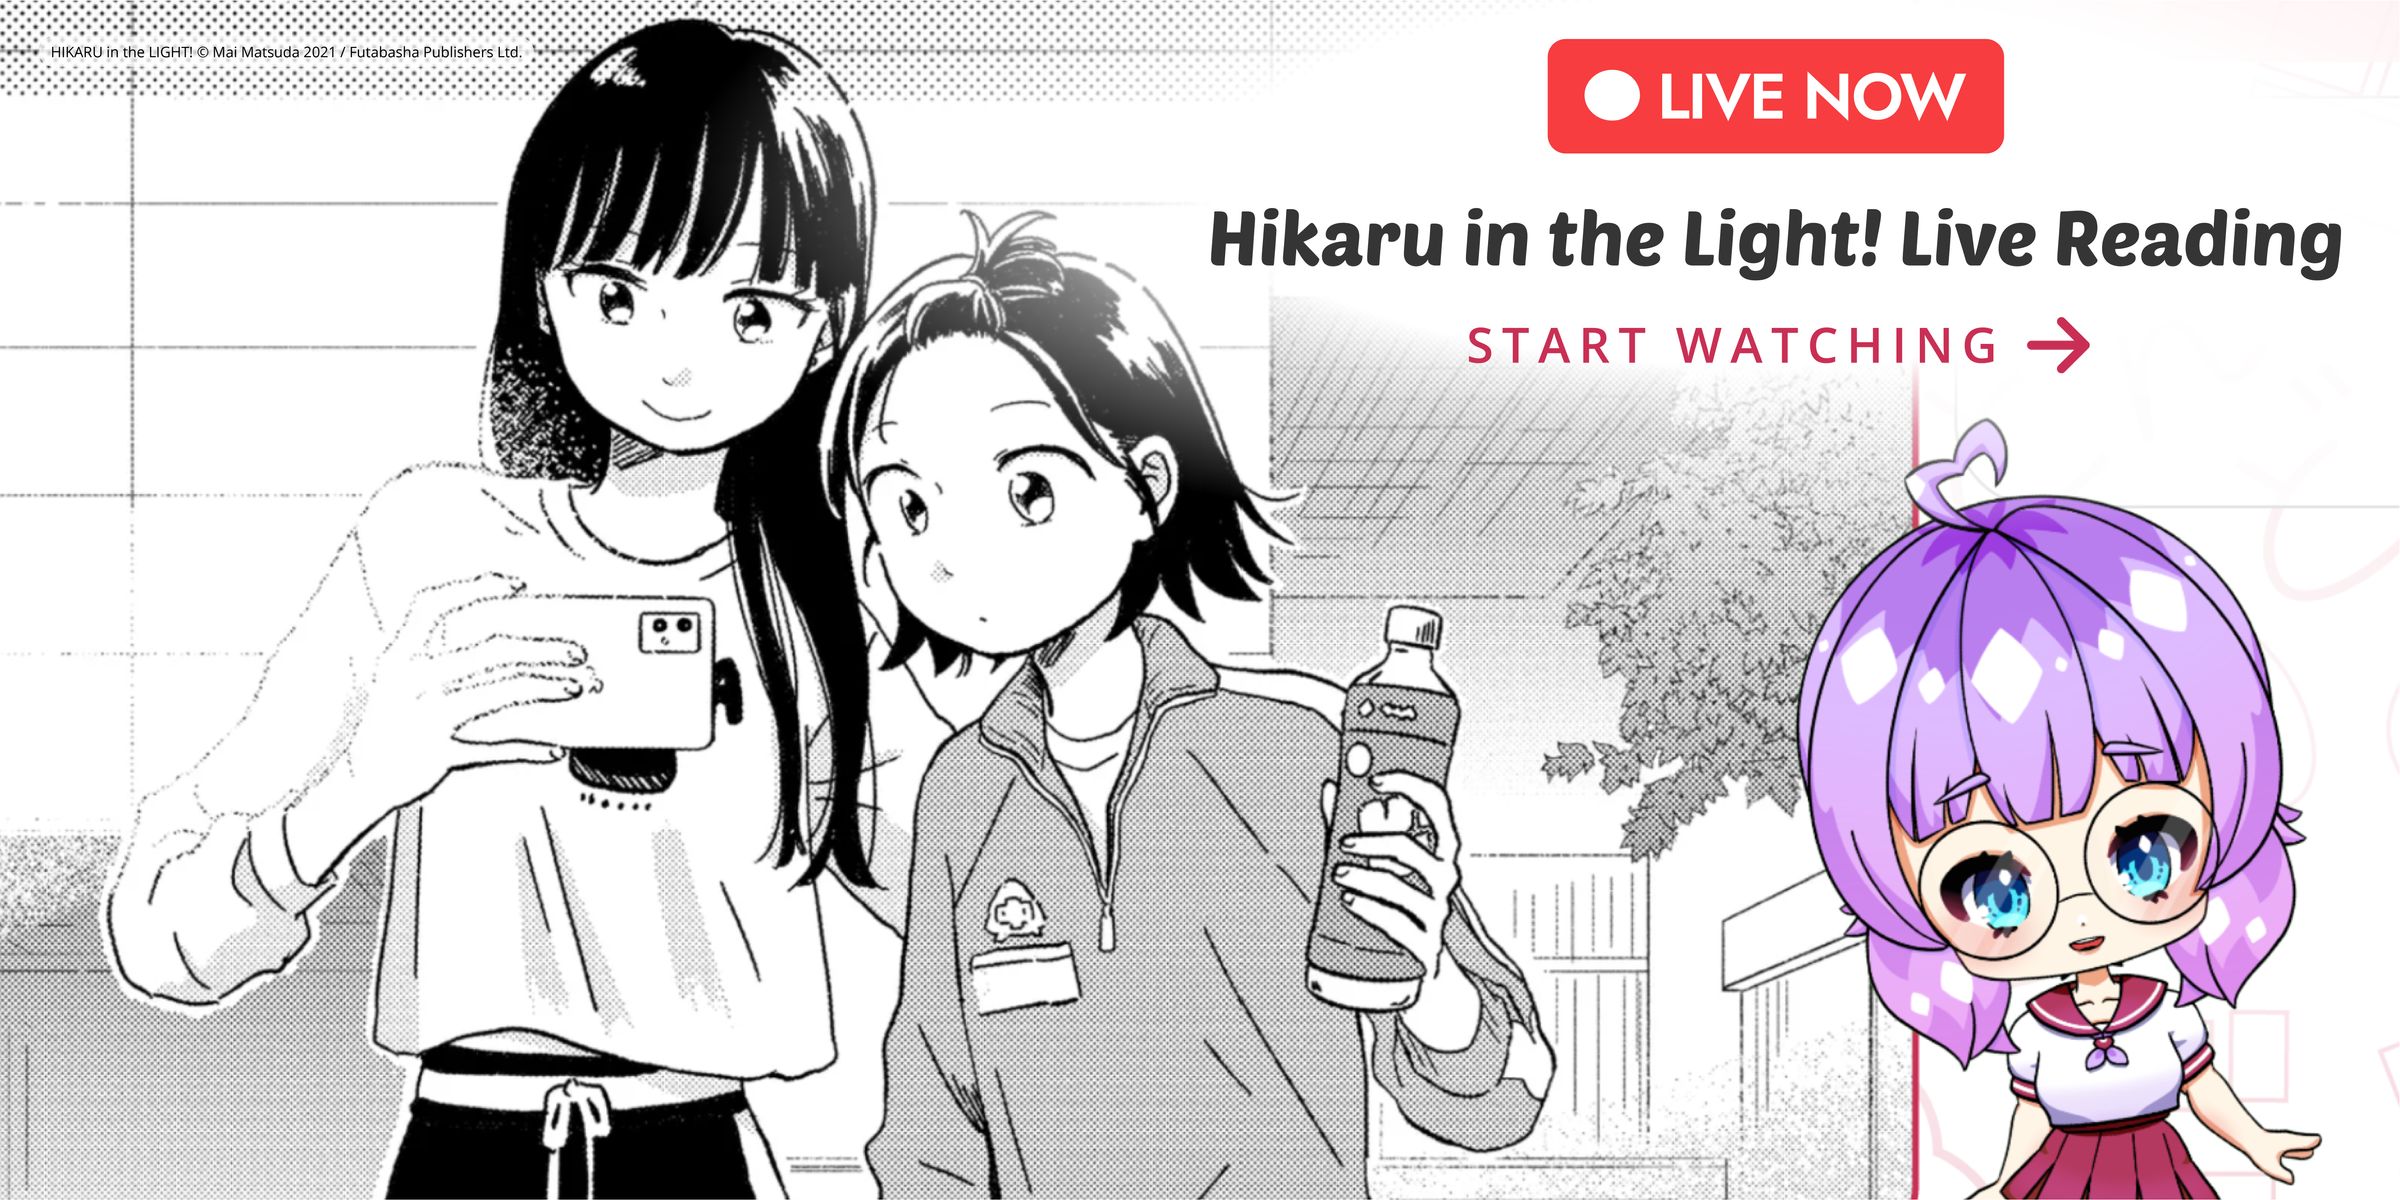 A female anime-style vtuber character with purple hair speaking in front of manga art. Live now. Hikaru in the Light Live Reading. Start watching.